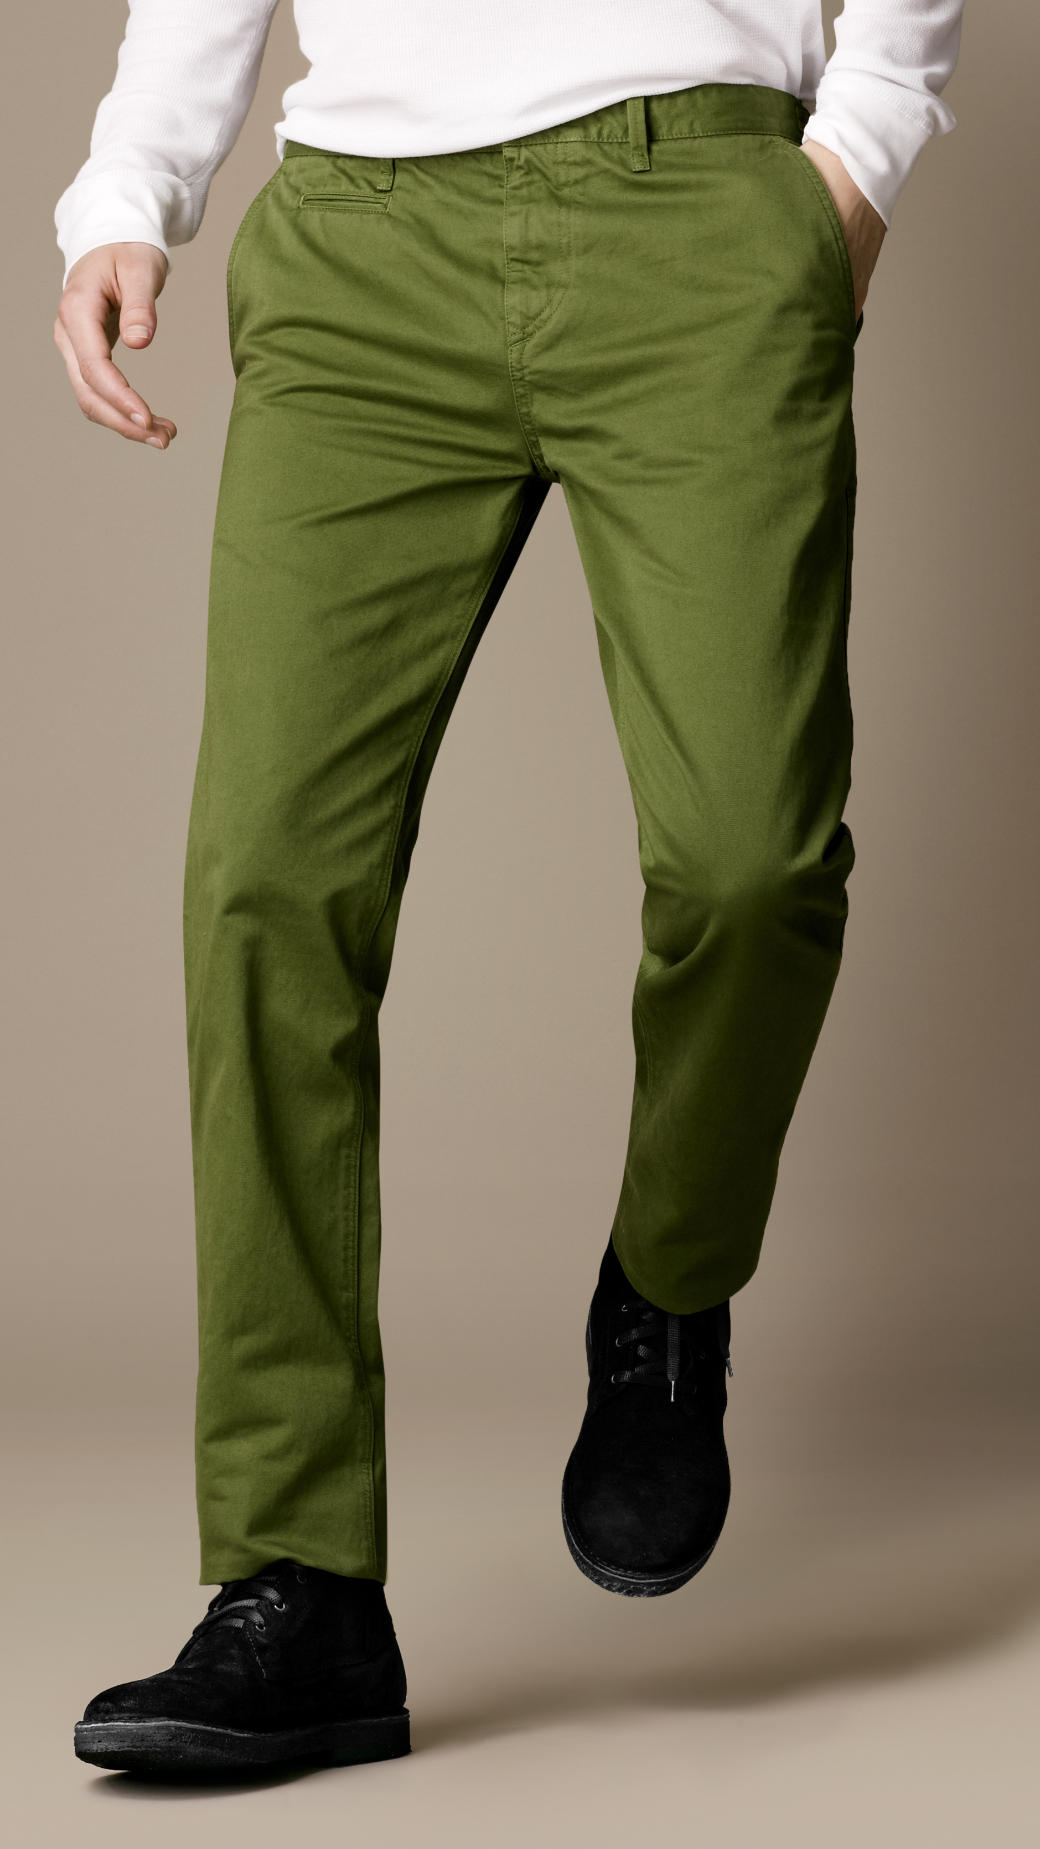 Lyst - Burberry brit Slim Fit Cotton Chinos in Green for Men